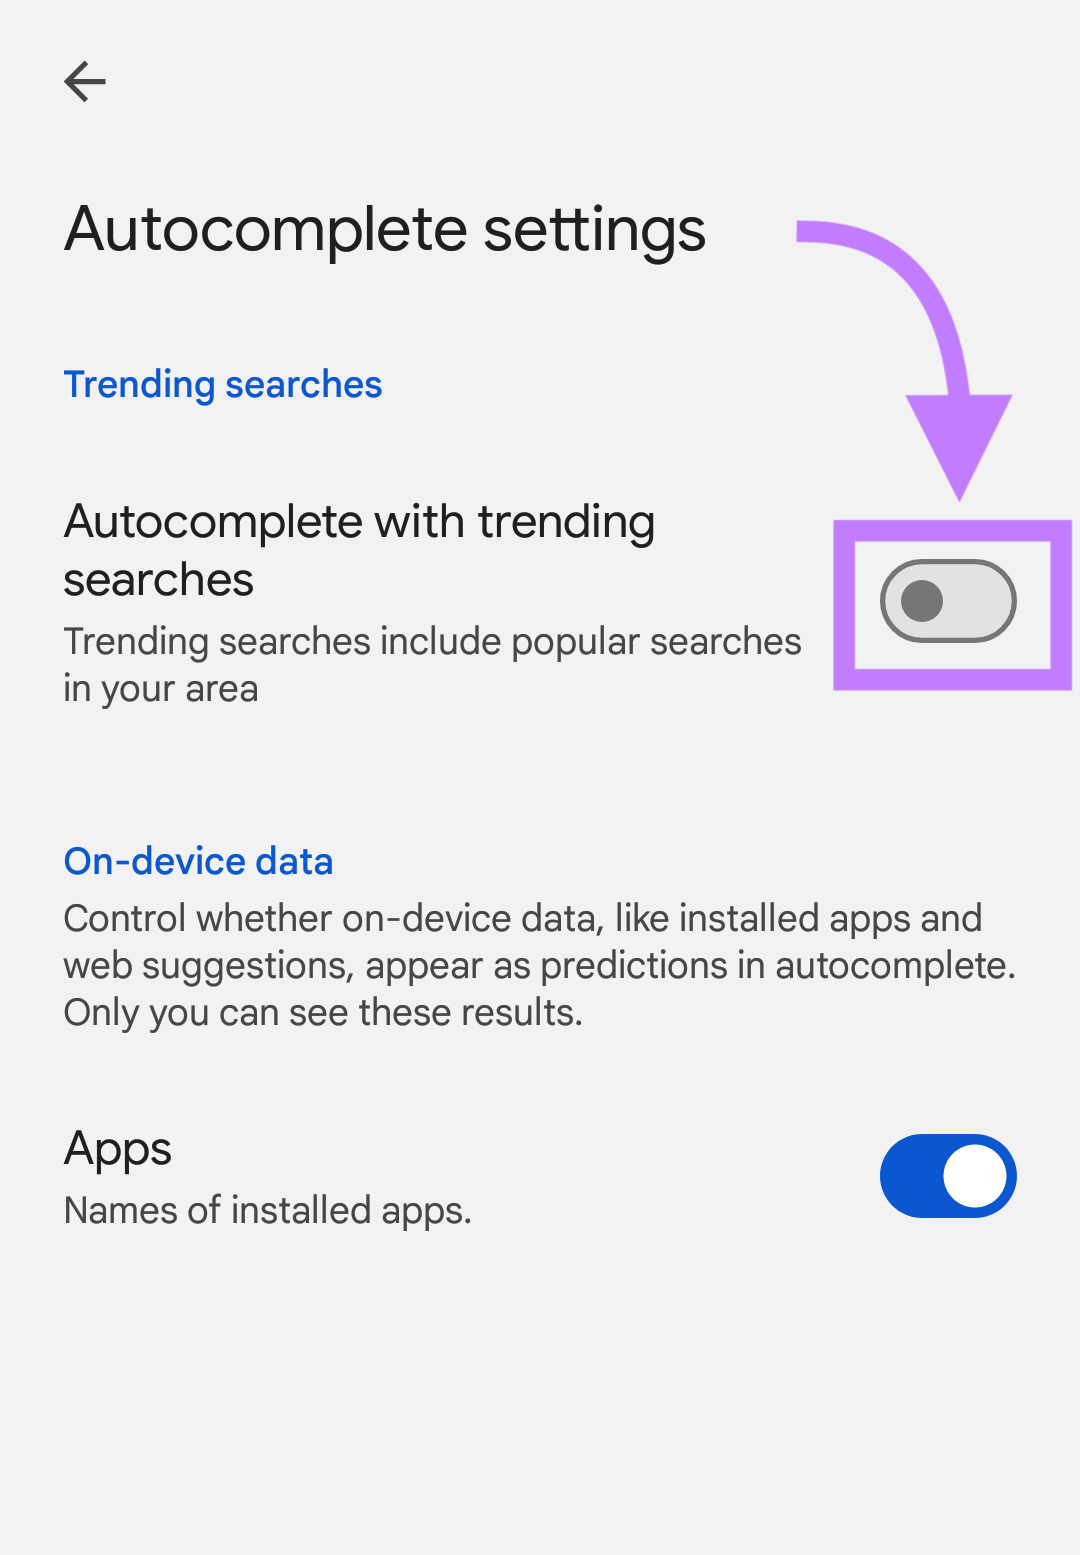 “Autocomplete with trending searches” switch for Android devices